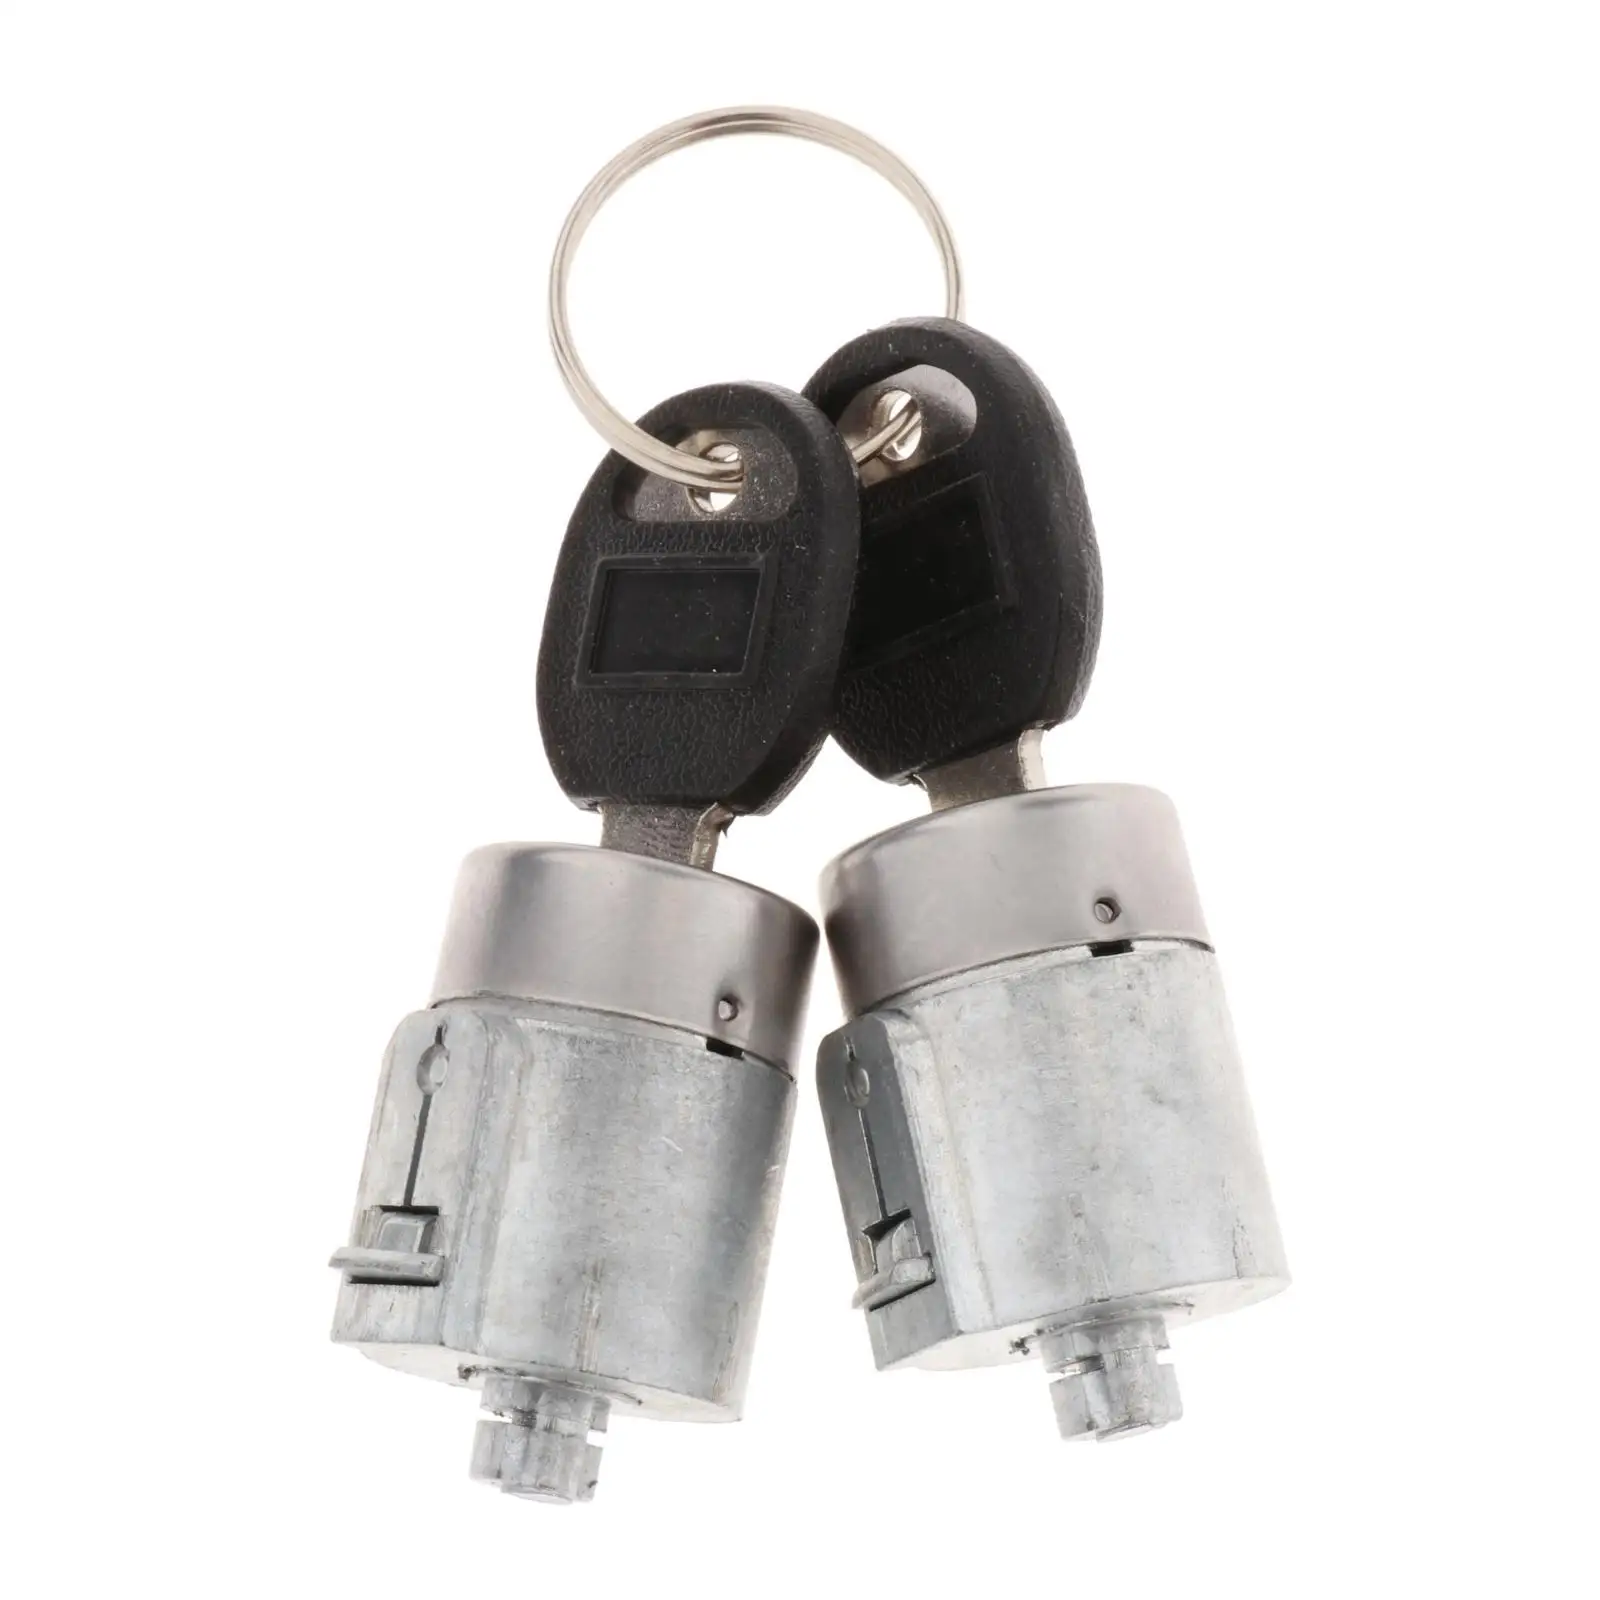 2 Pieces Door Lock Cylinder Set Accessory with Keys 057100275 Accessories for 0 1995-99 Compact Lightweight